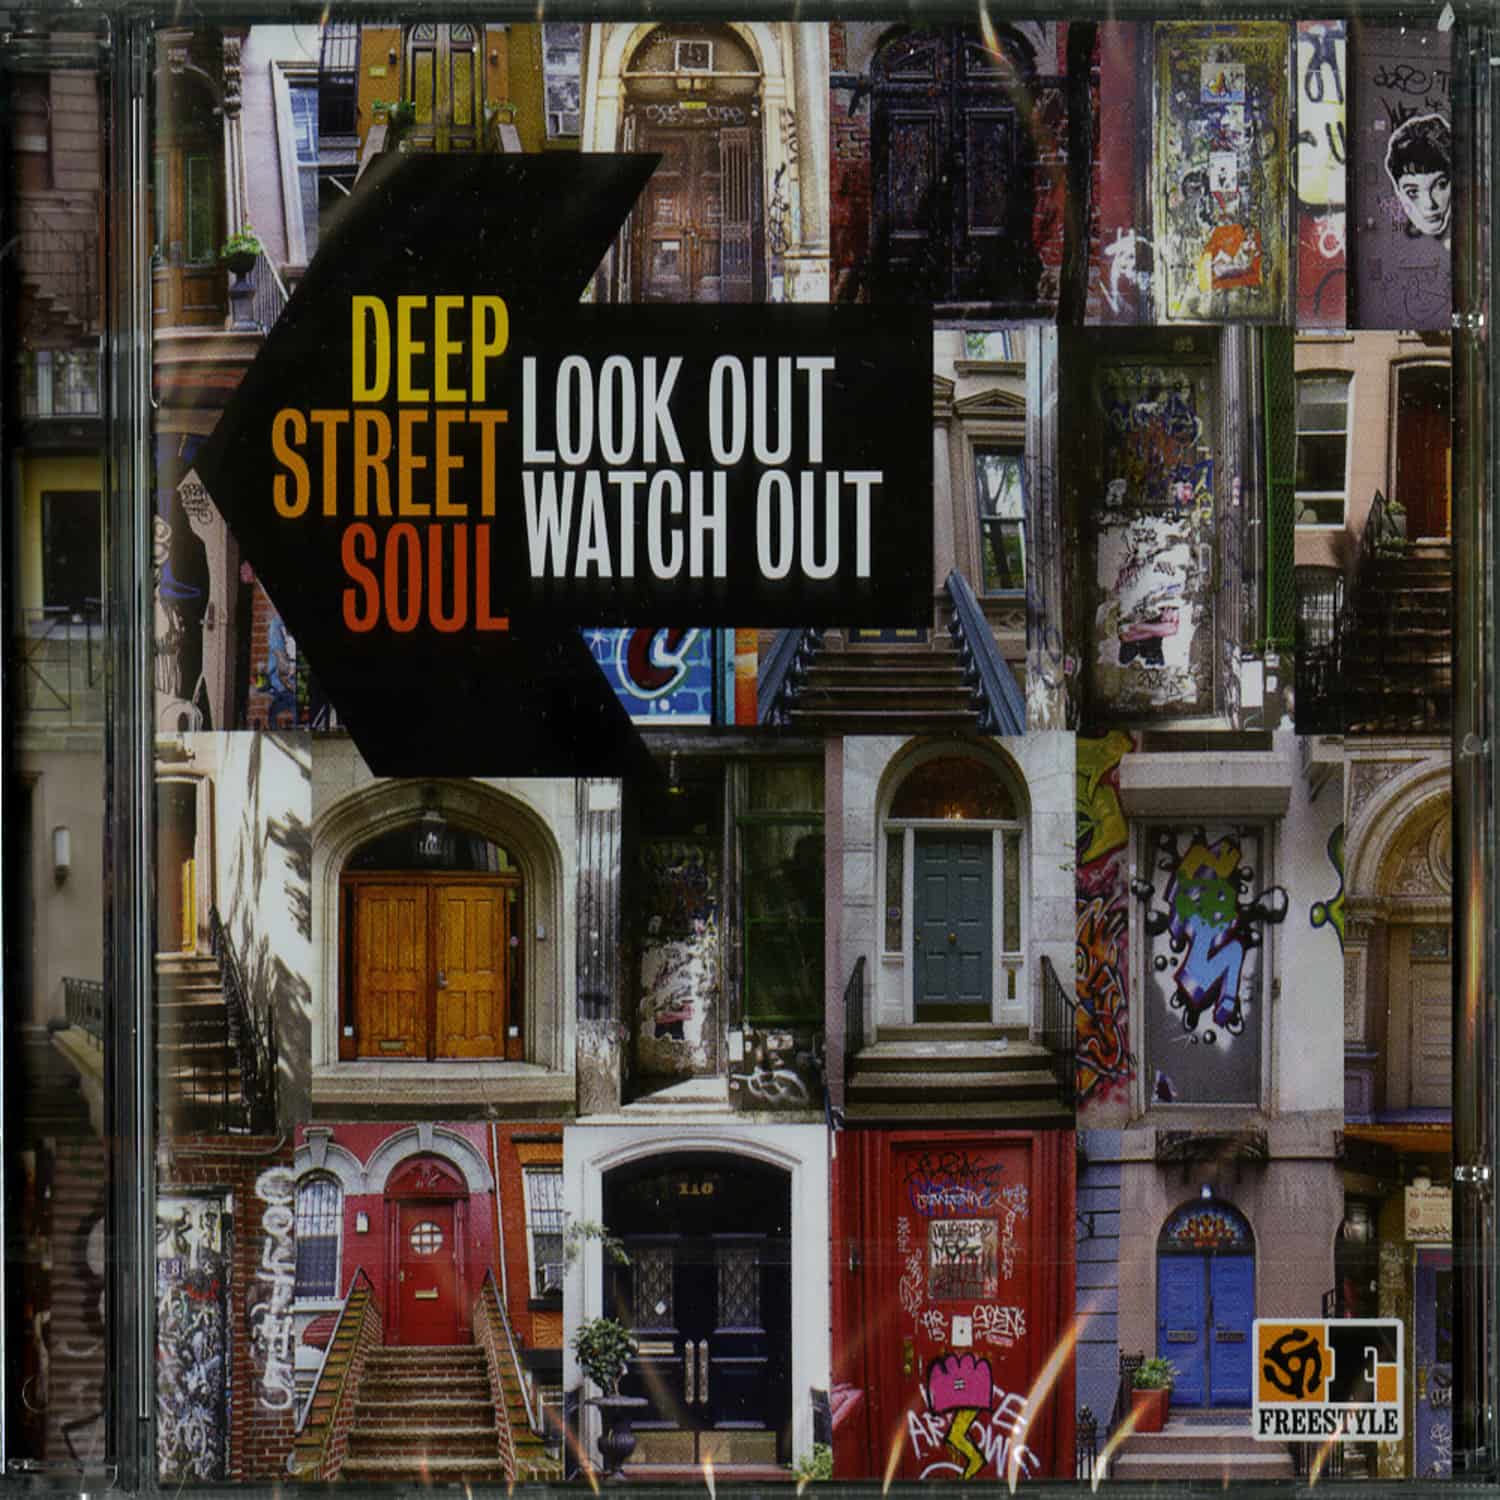 Deep Street Soul - LOOK OUT, WATCH OUT 